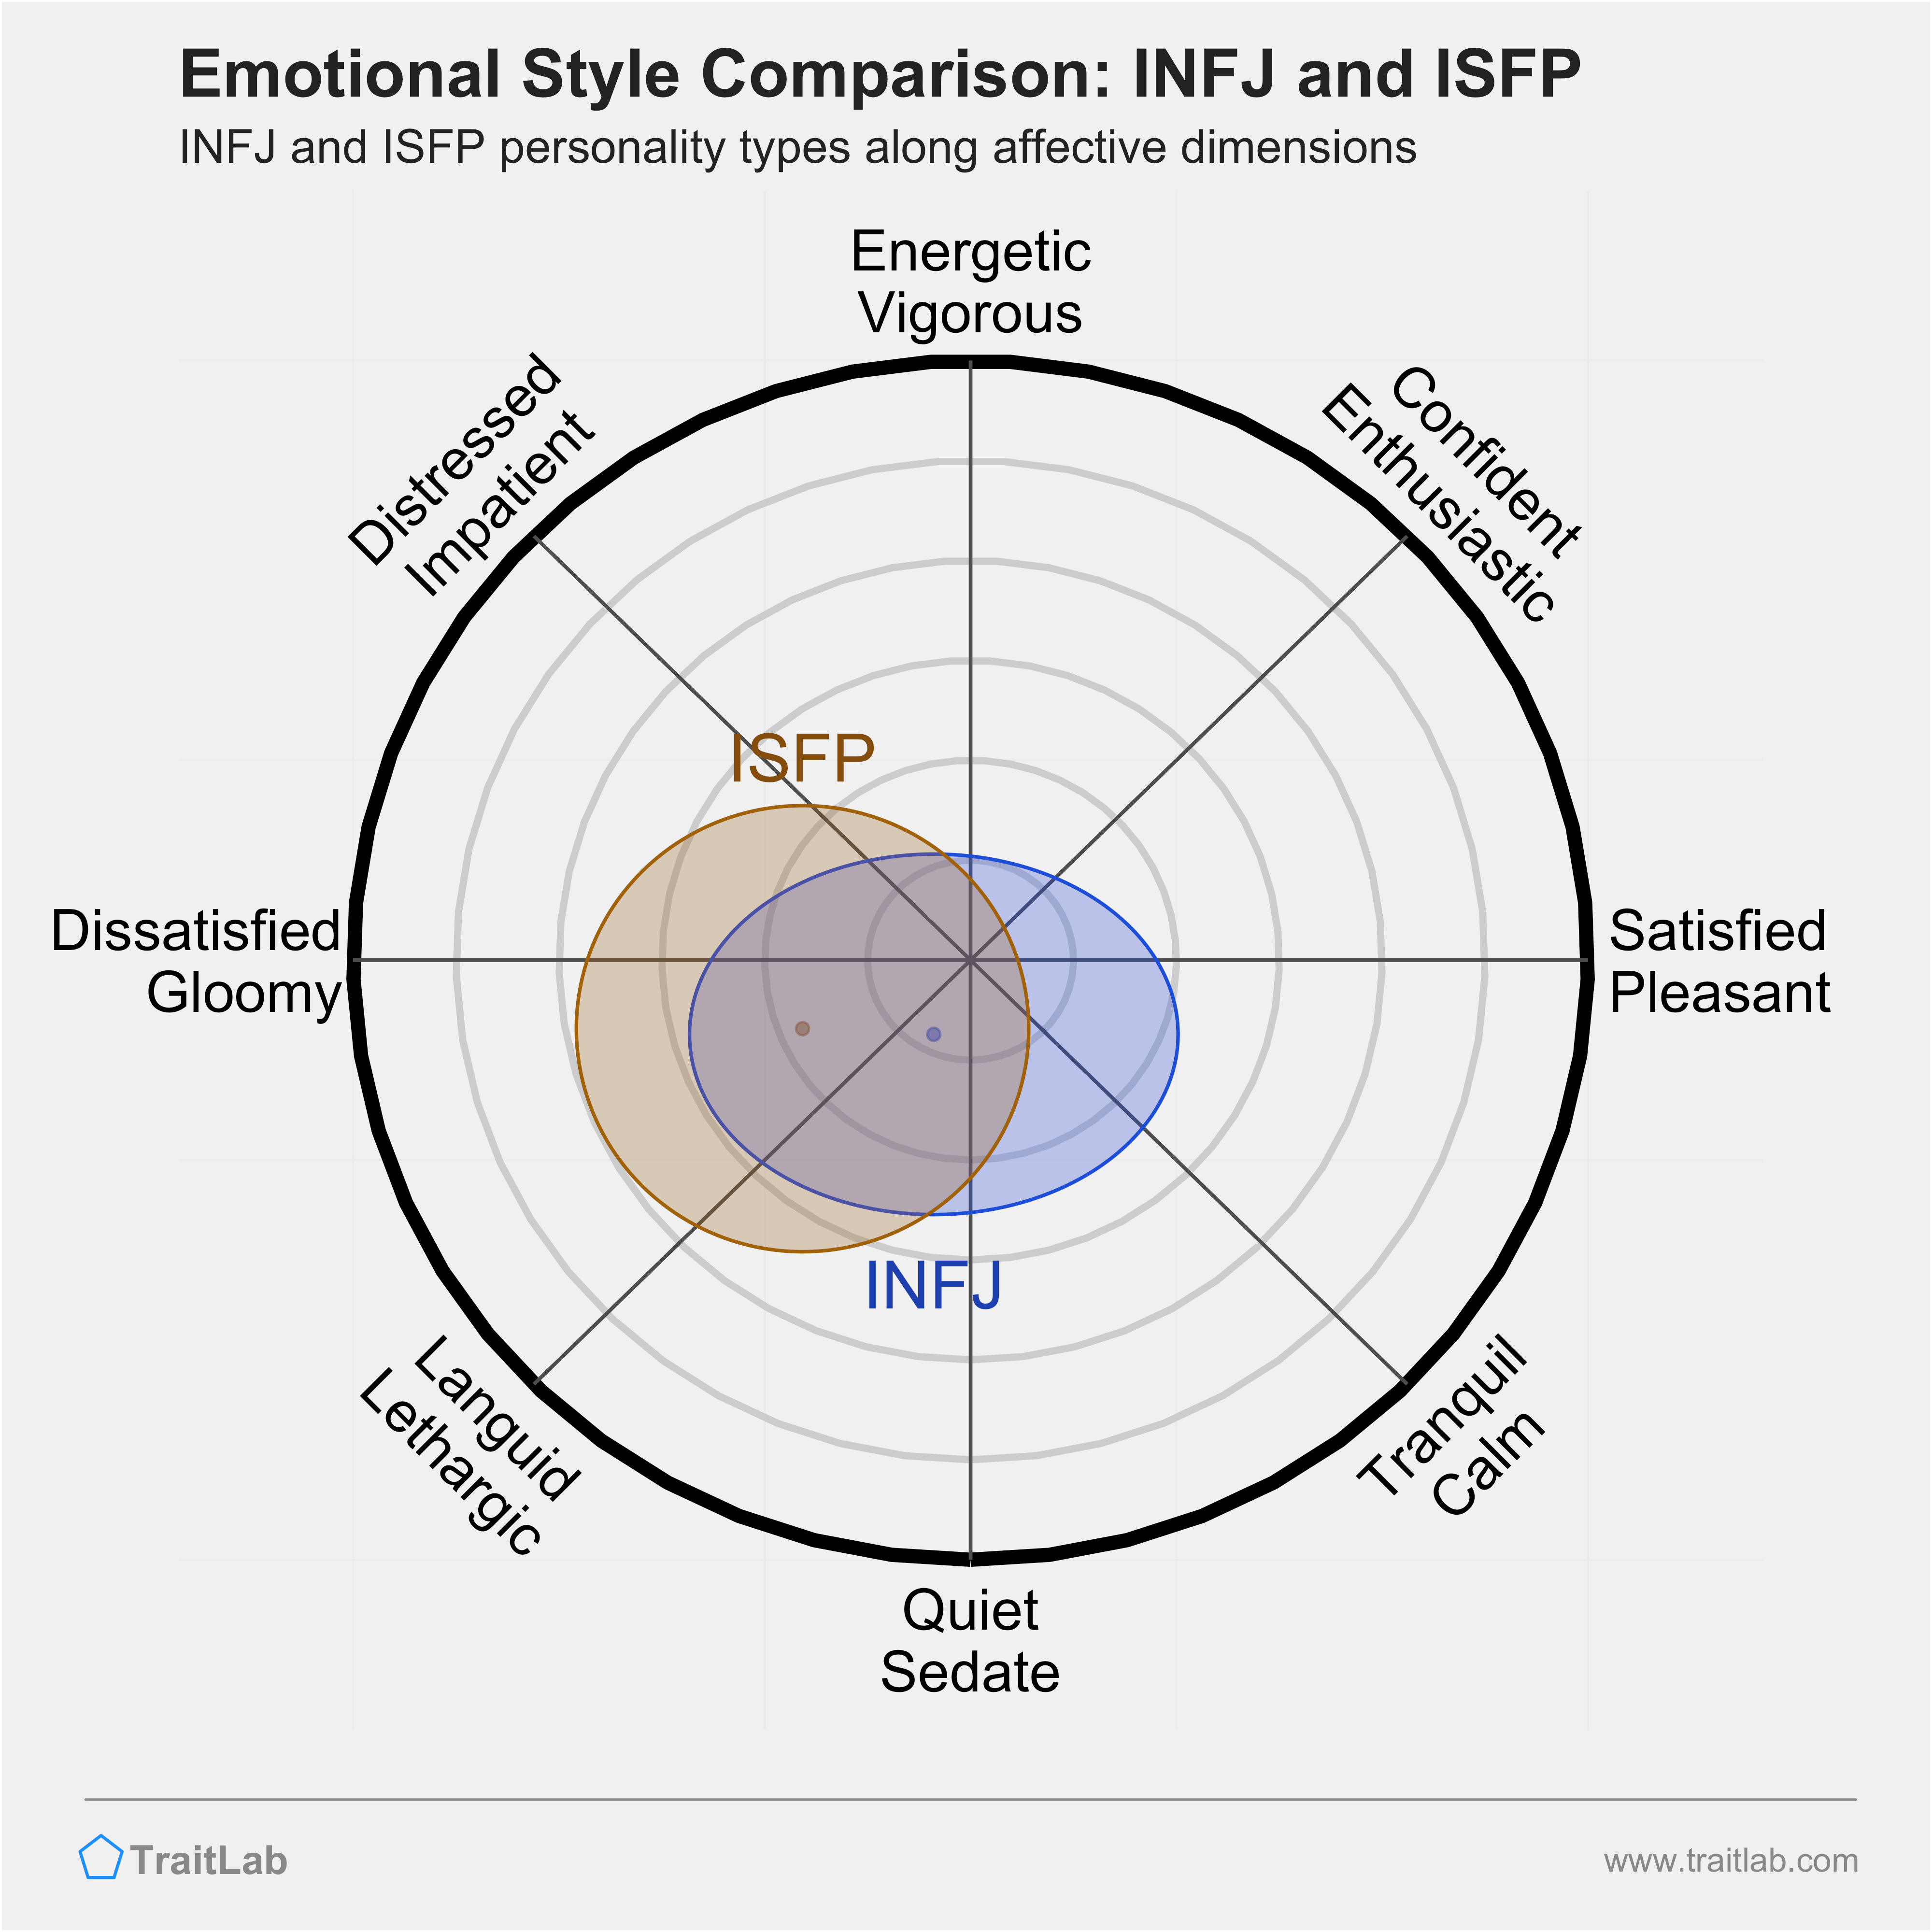 INFJ and ISFP comparison across emotional (affective) dimensions